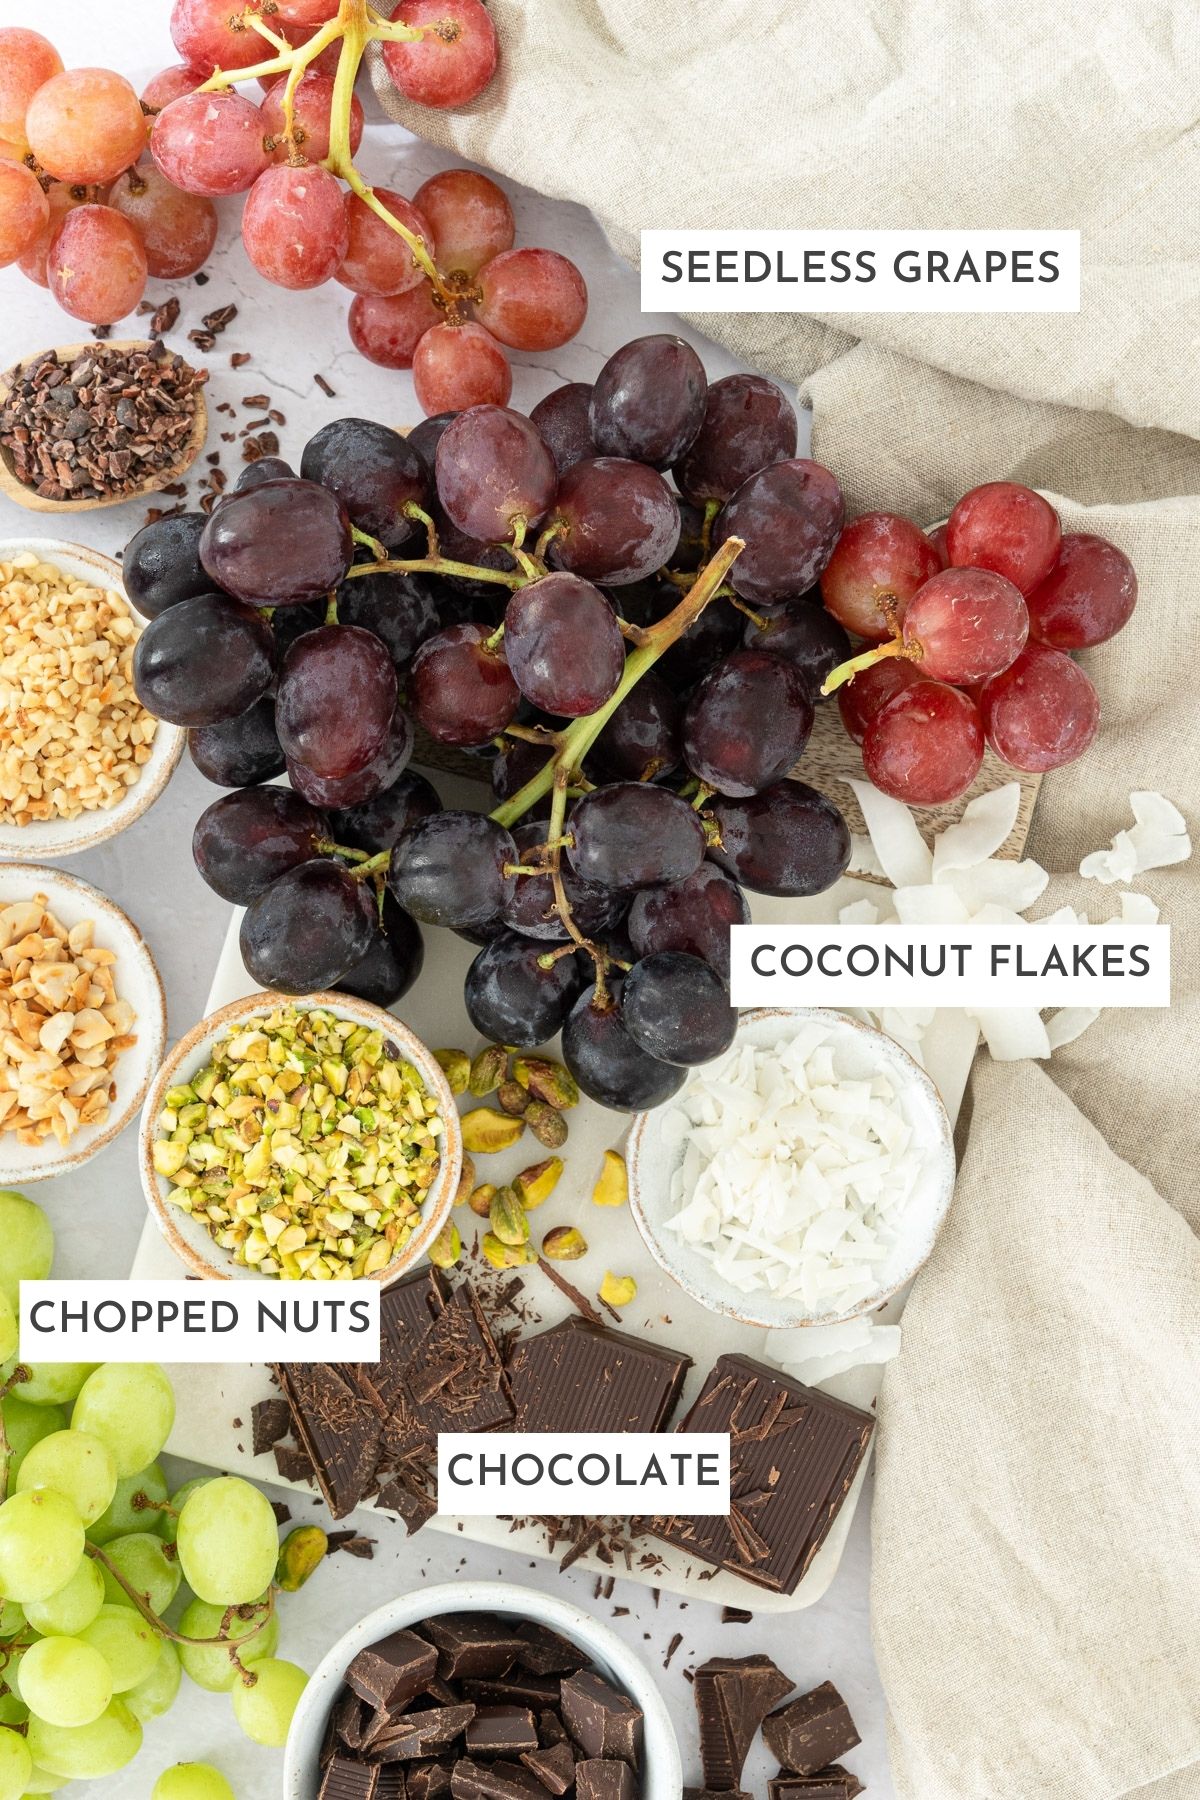 Ingredients to make chocolate covered grapes: grapes, chocolate, chopped nuts, coconut flakes.